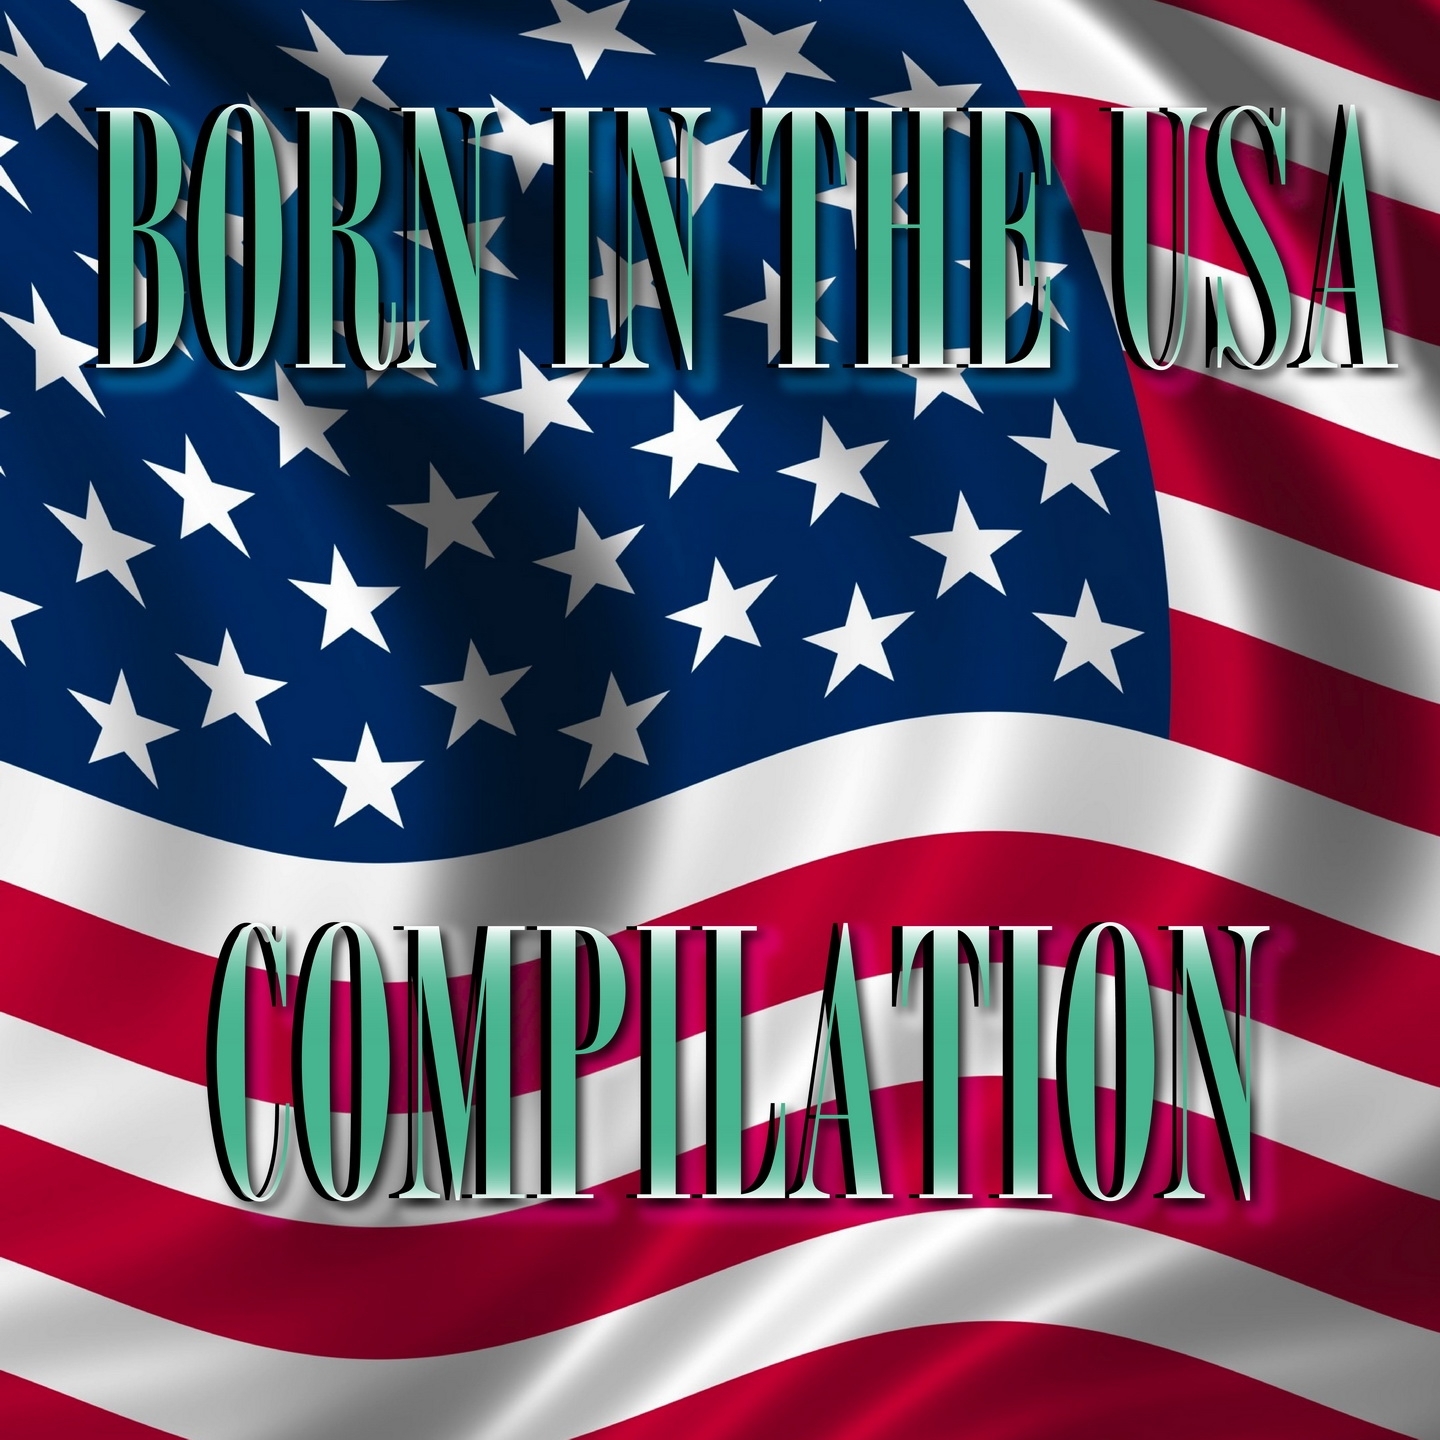 Born in the U.S.A. Best Hits Compilation, Vol. 1